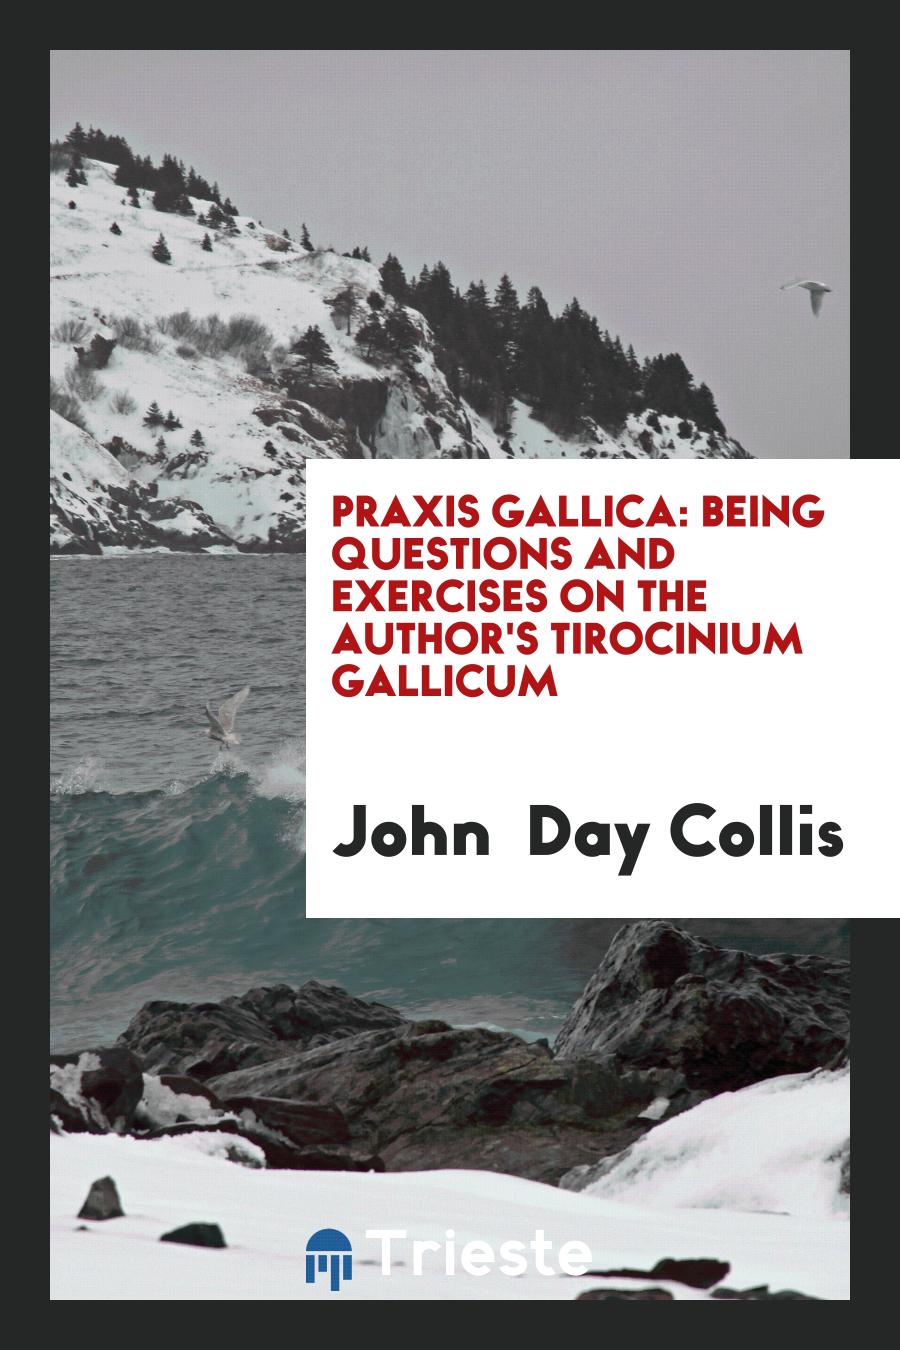 Praxis Gallica: being questions and exercises on the author's Tirocinium Gallicum